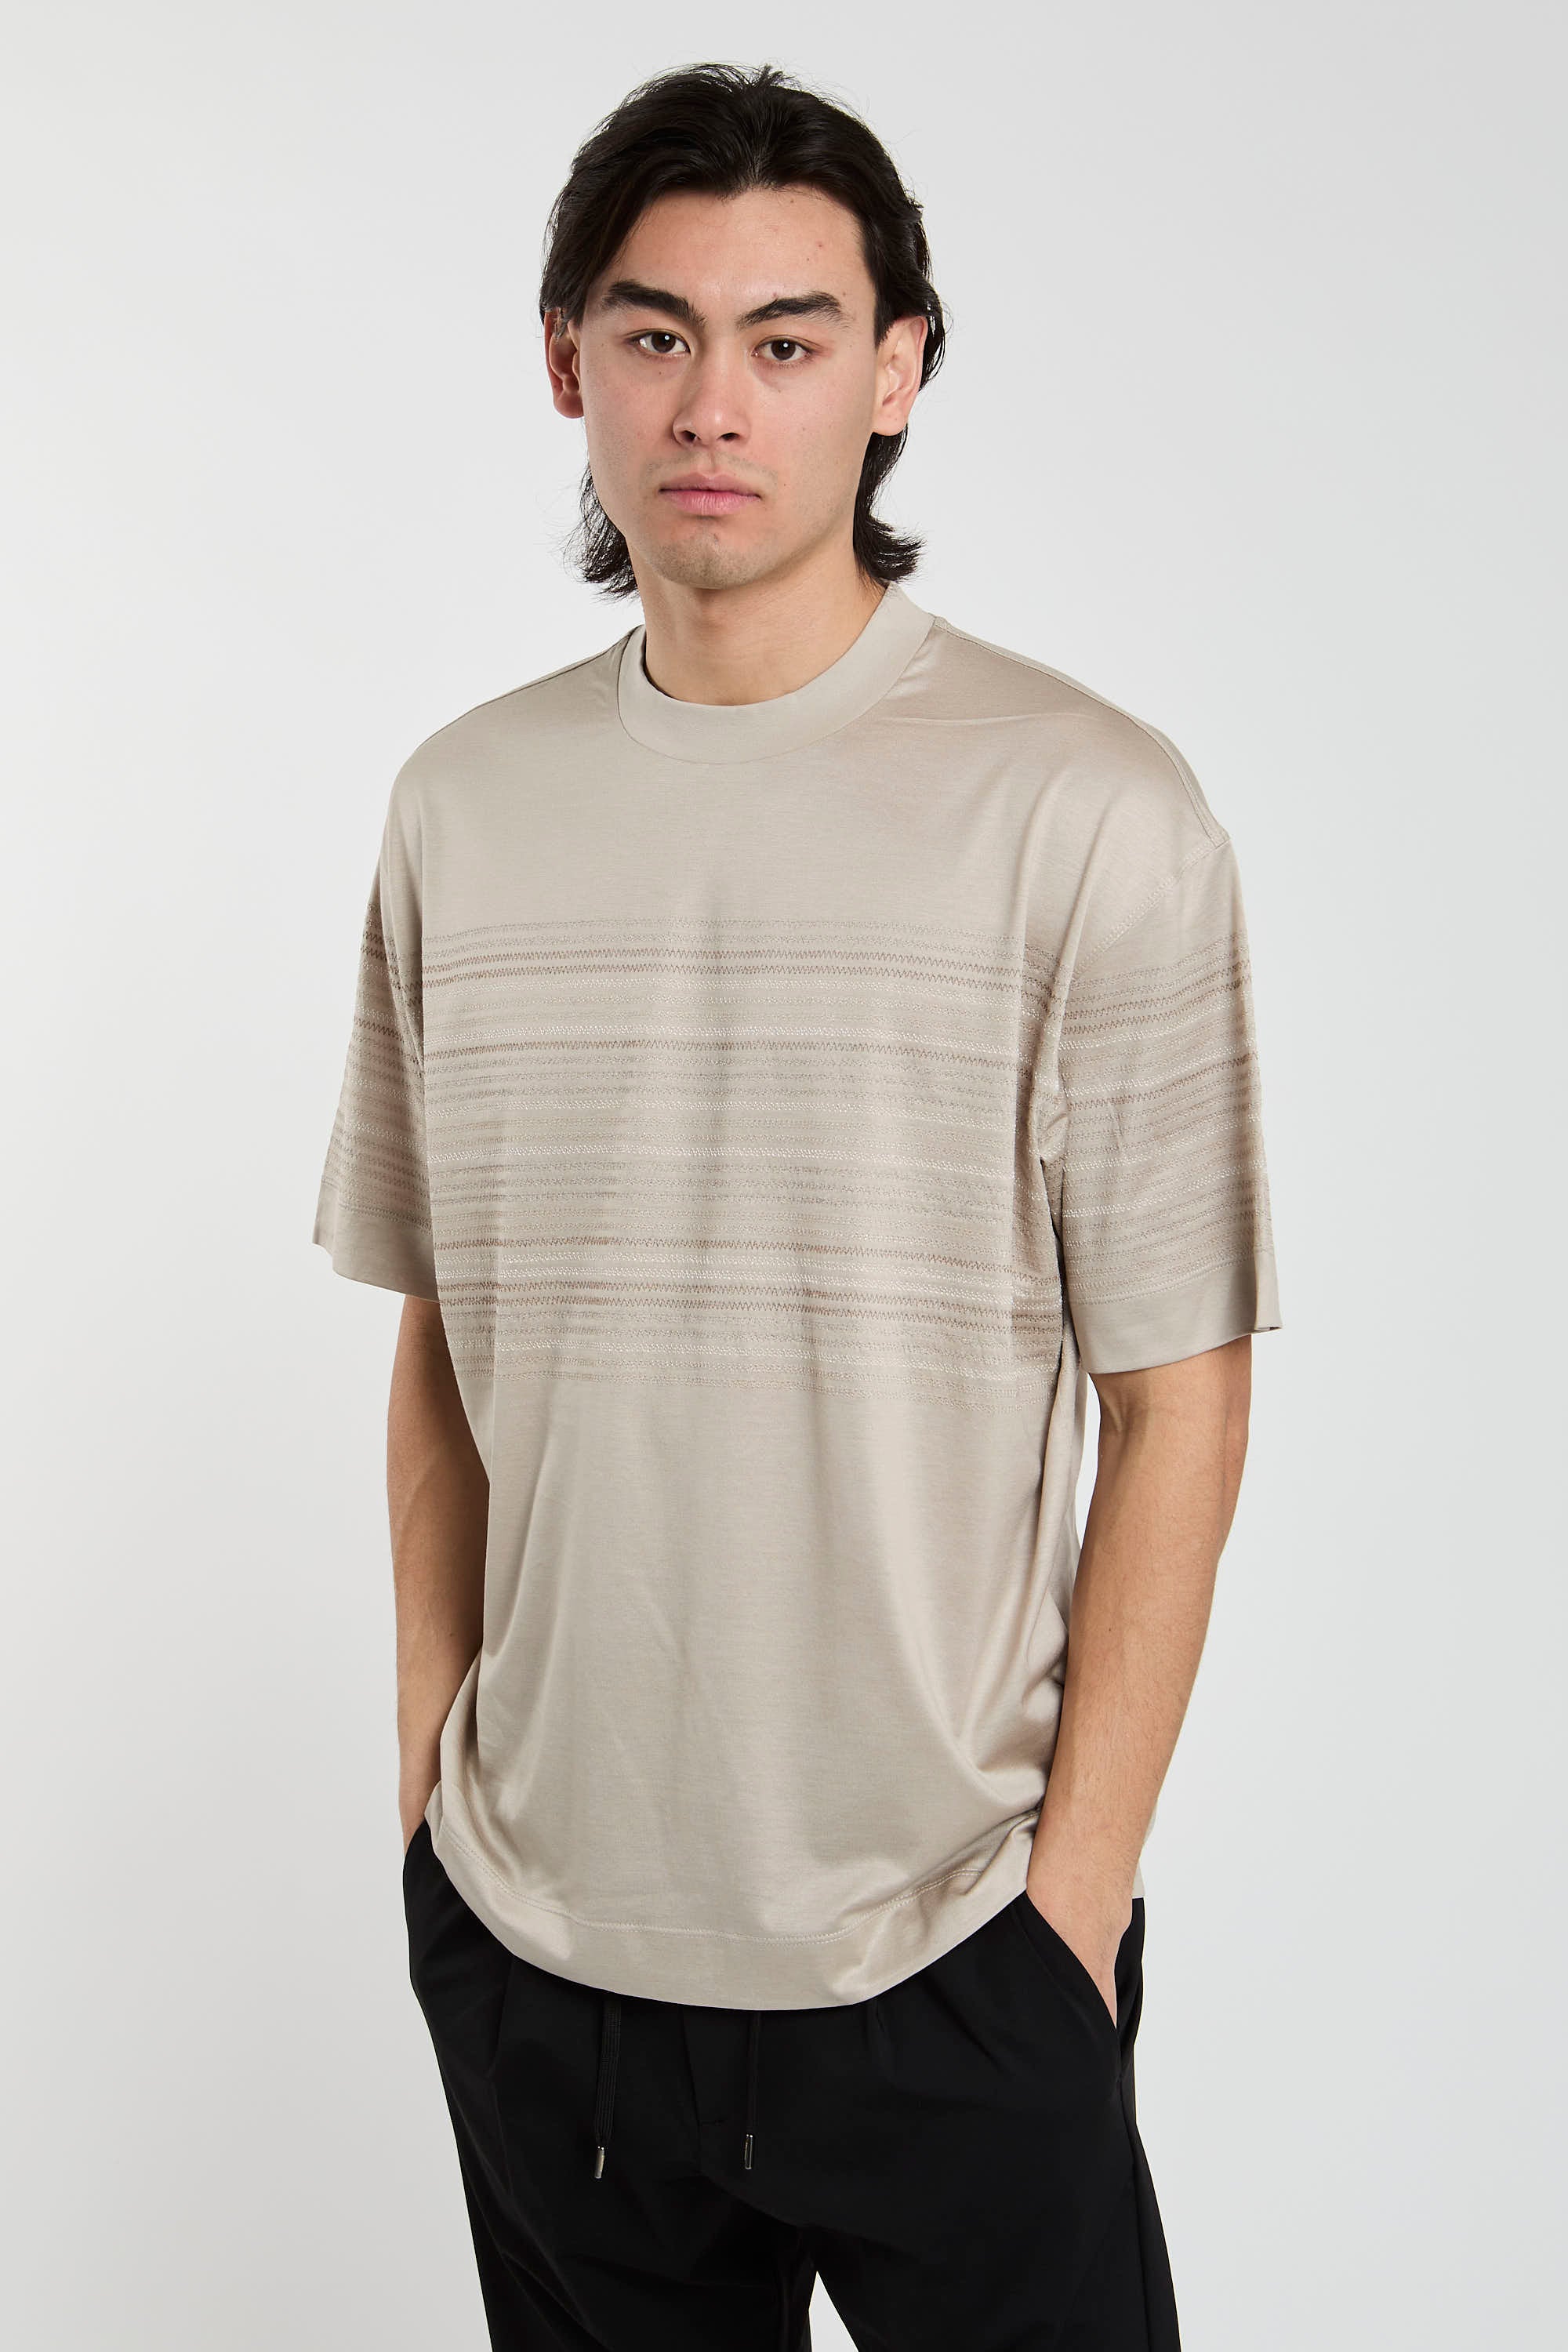 Emporio Armani Silver T-Shirt in Cotton and Lyocell Blend Jersey-3